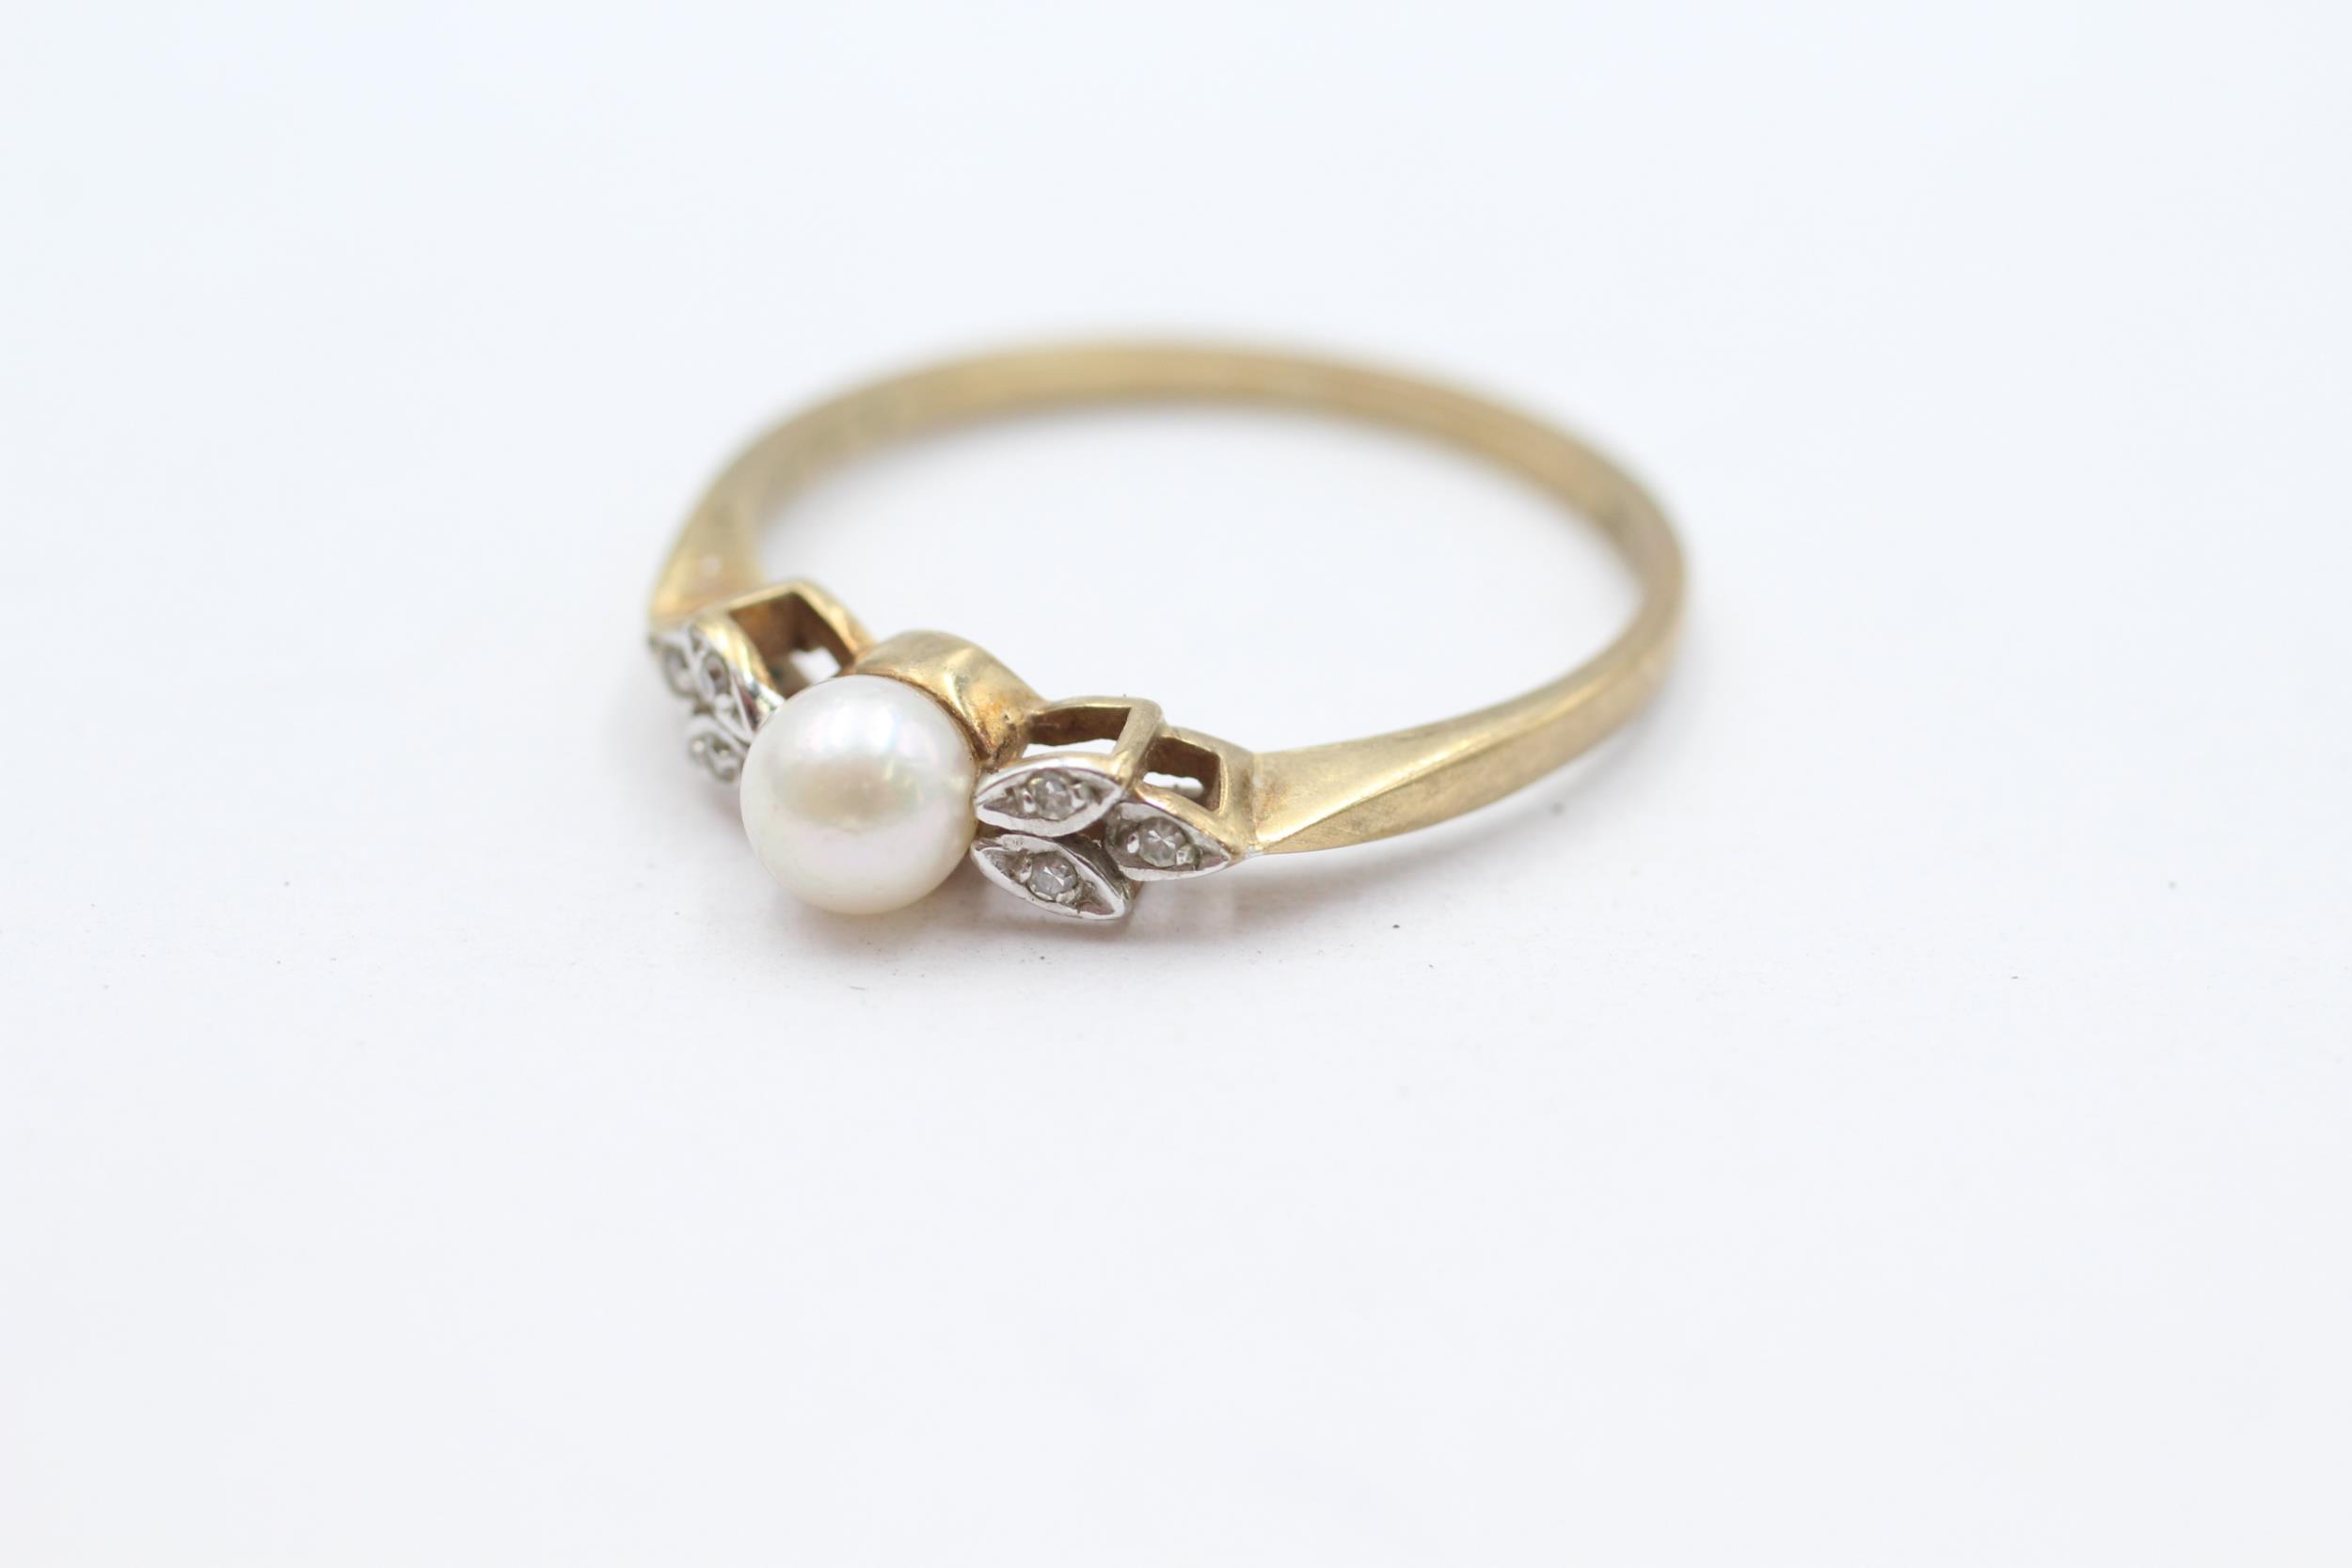 9ct gold cultured pearl & diamond dress ring Size R 1/2 - 1.9 g - Image 4 of 5